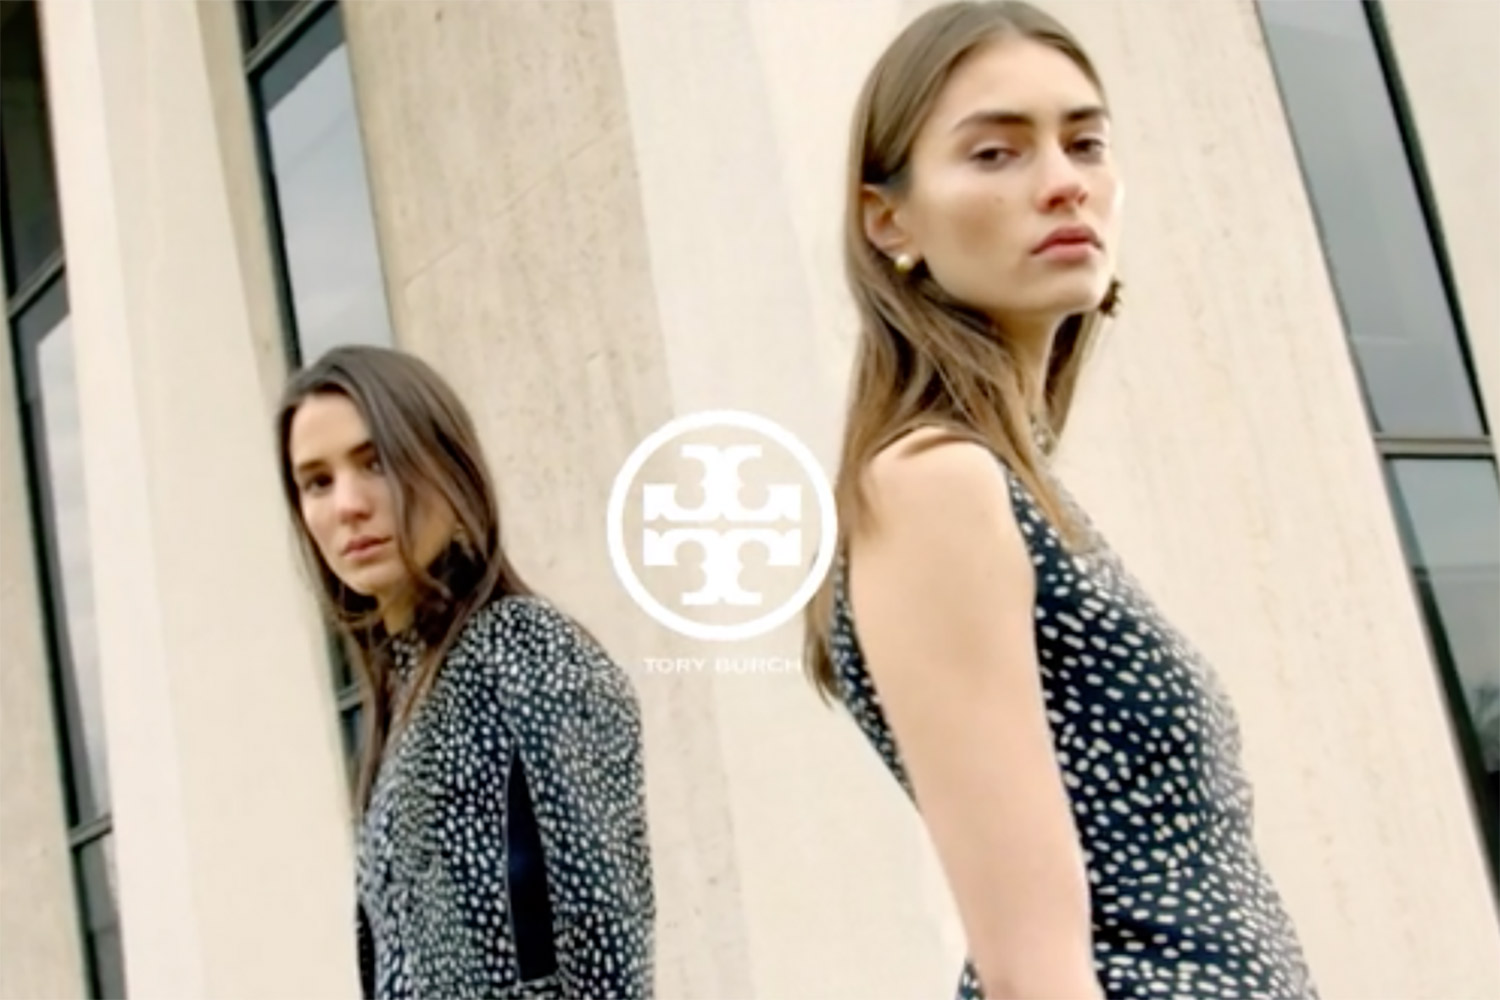 TORY BURCH stores in Barcelona | SHOPenauer